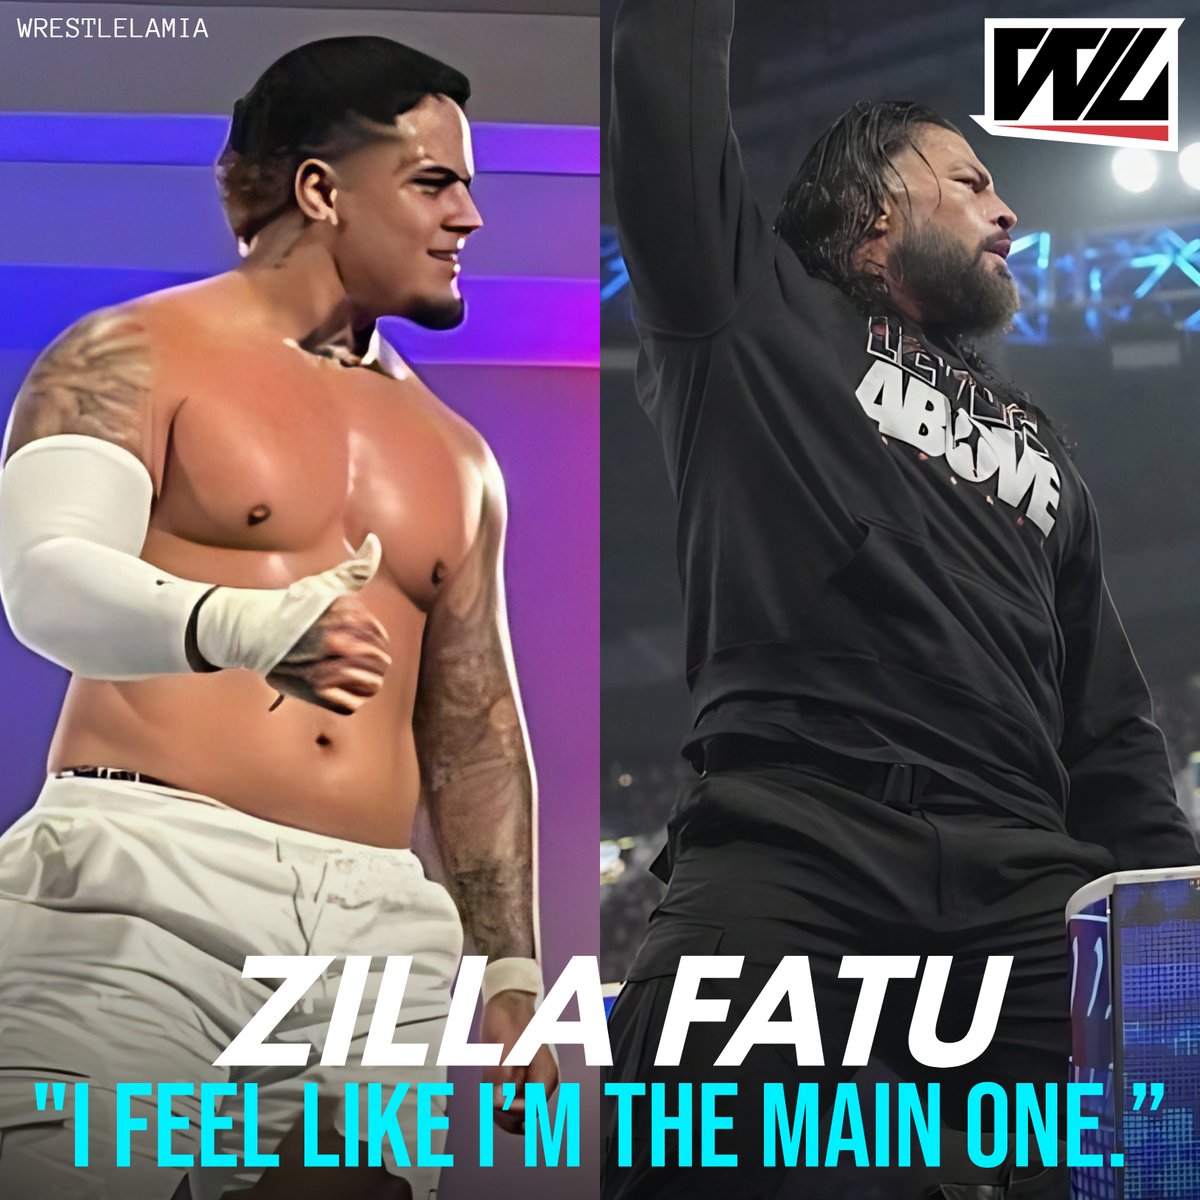 Zilla Fatu says he is the 'Main One' “He’s like one of those kids in the school where like the crazy one where they stand on top of the table [screaming]. Yeah, he’s one of those, you know. Here we are just looking at him like: ‘Okay, okay, wait till it’s our time,’ you know.